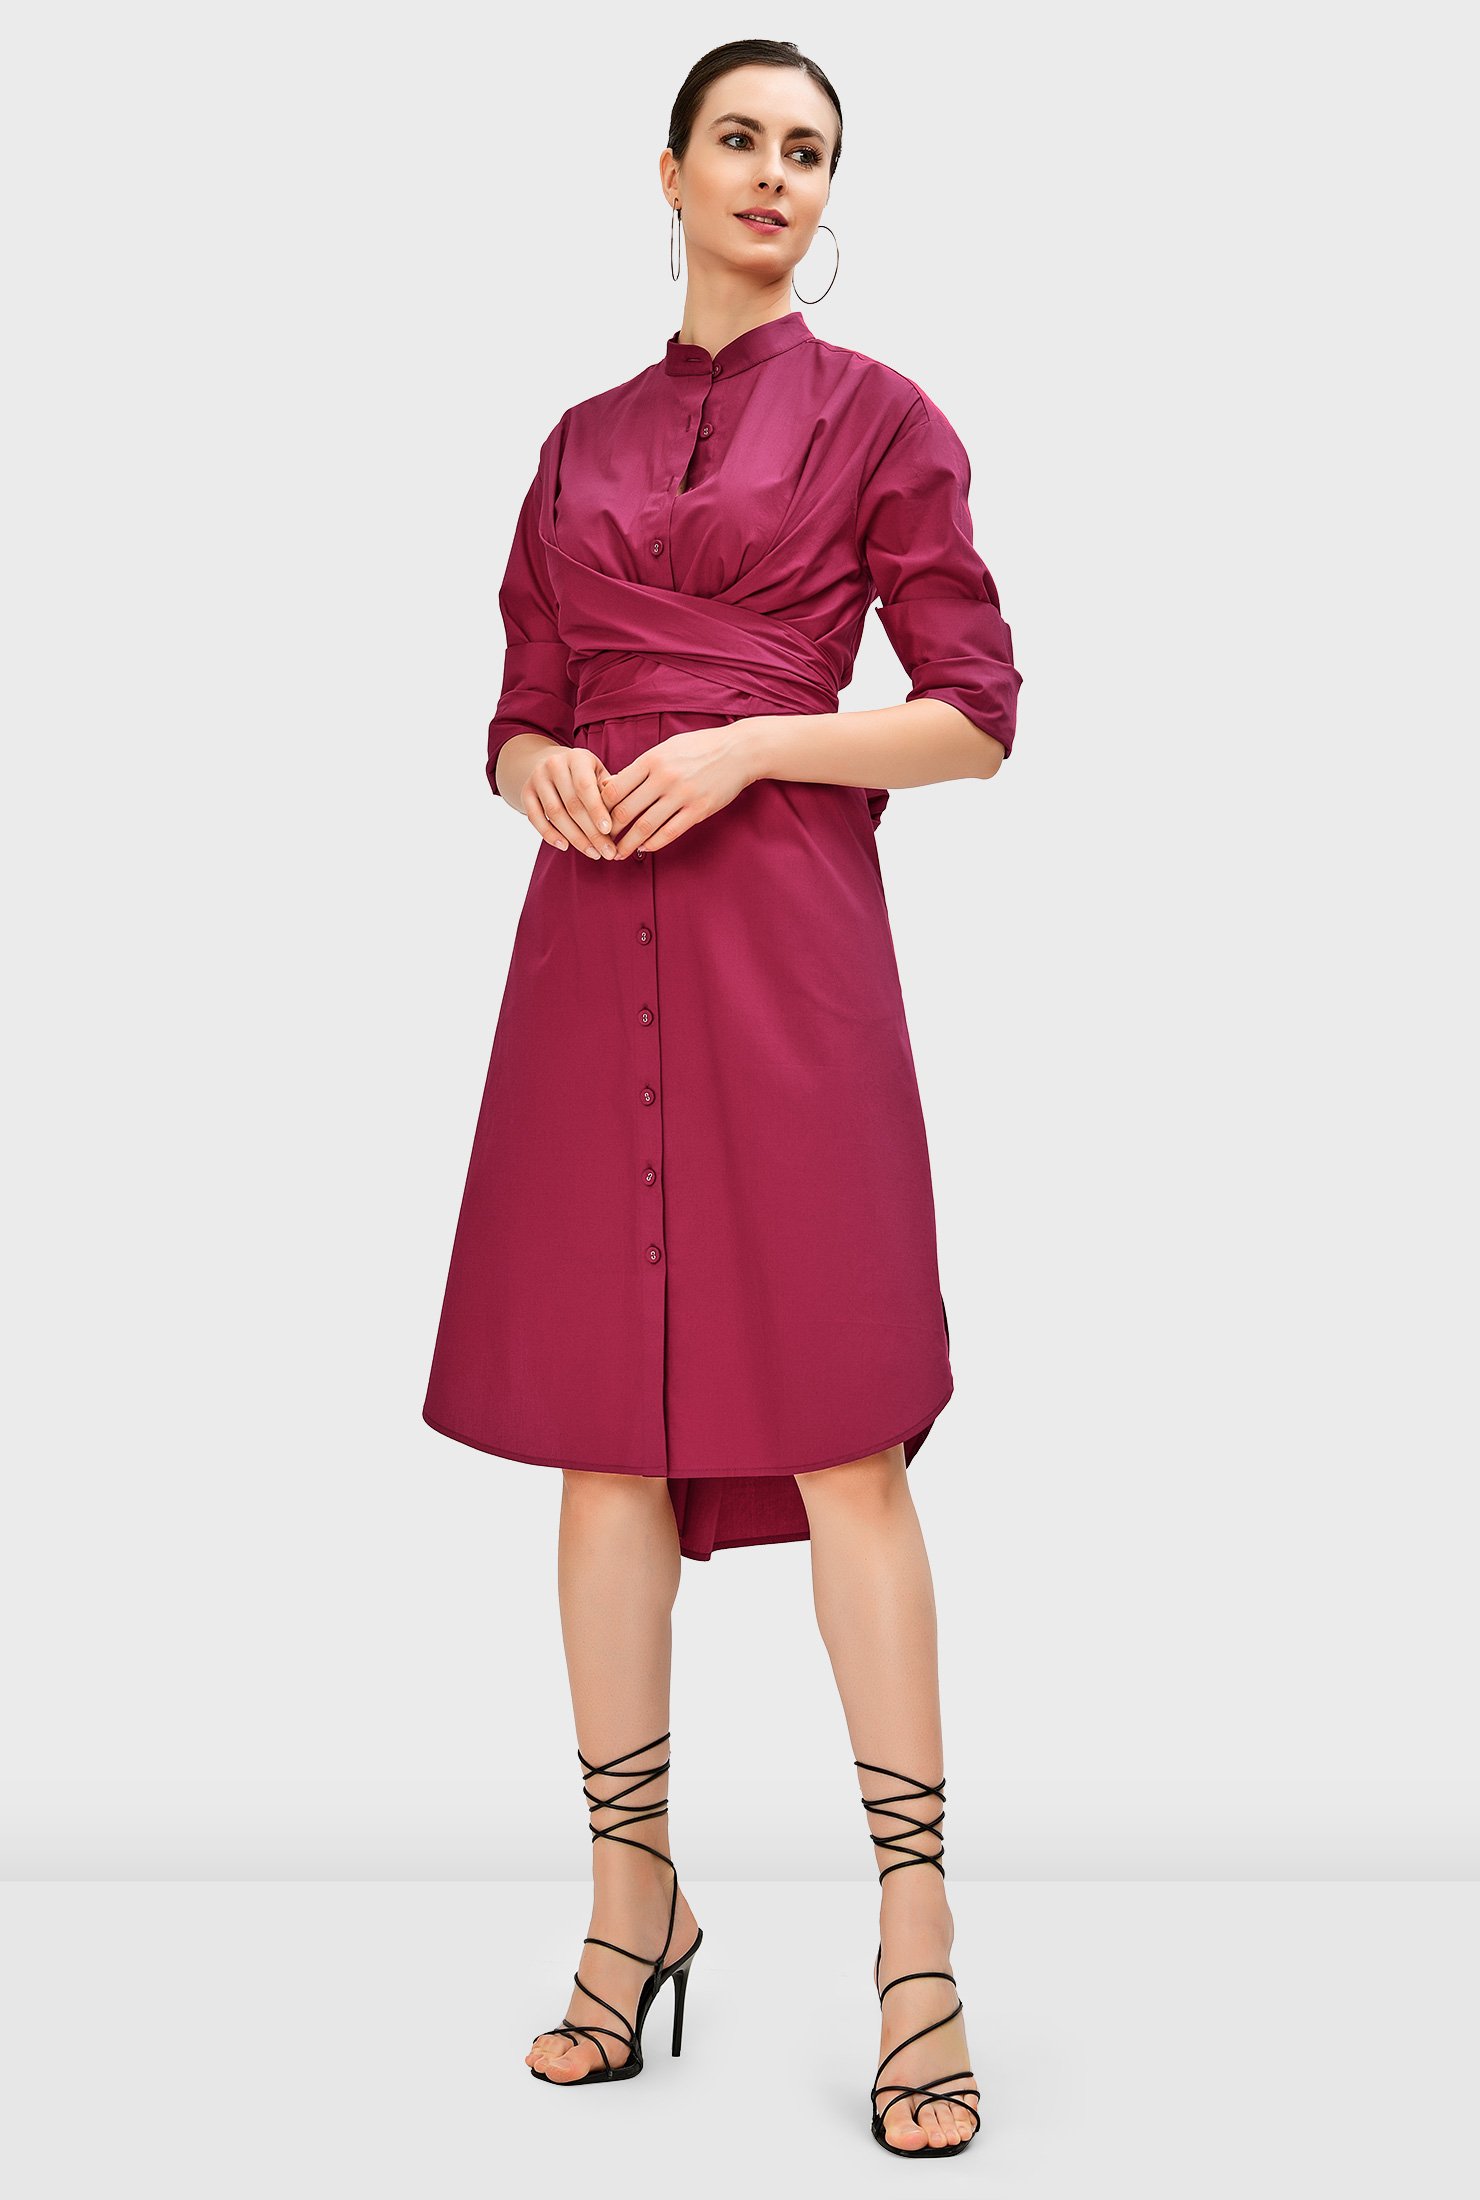 A vented high-low shirttail hem adds a bit of swing to our crisp cotton poplin shirt dress cinched in with pleated sash-ties crossed at the front and tied at the back.